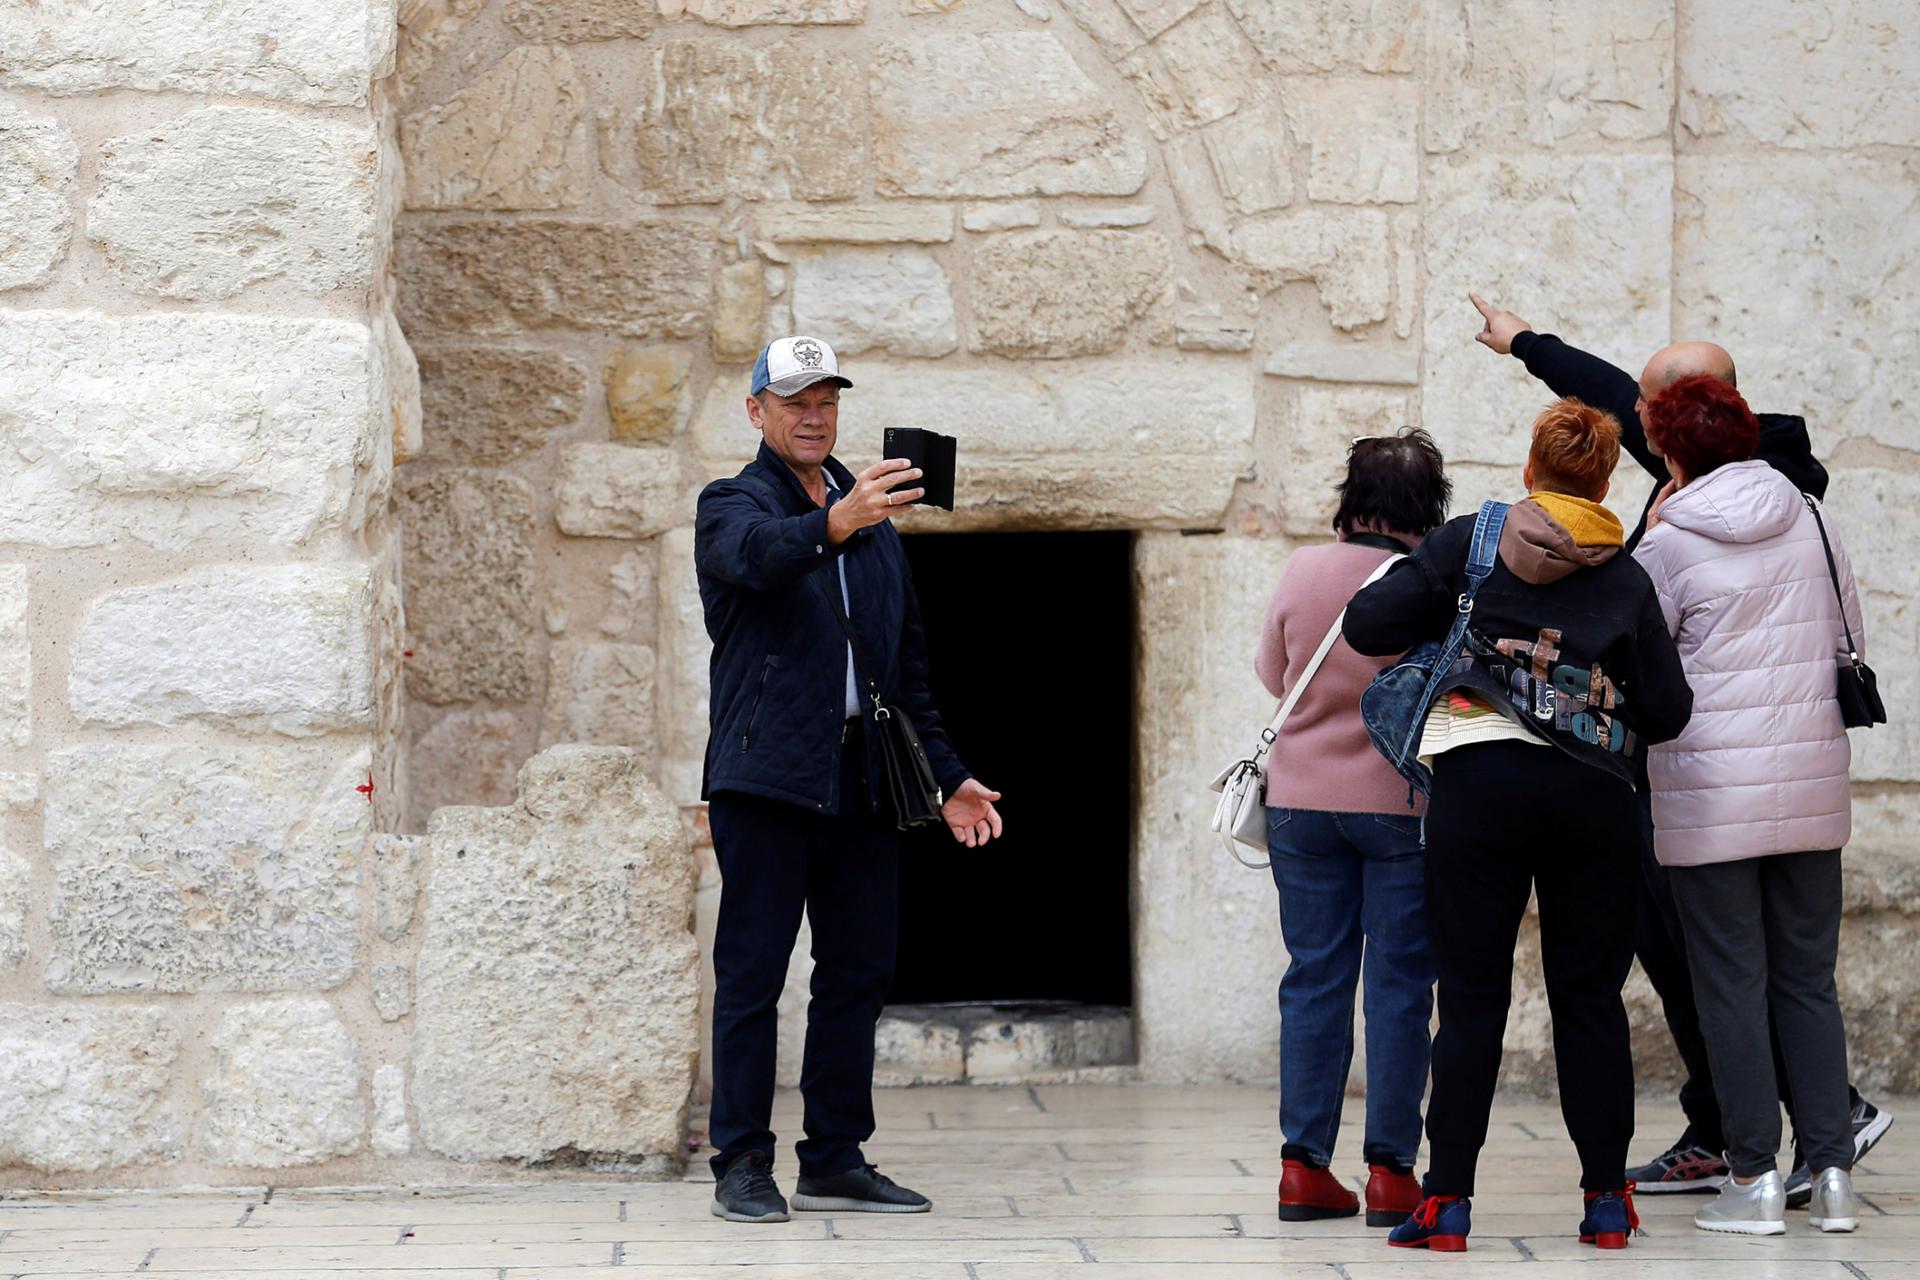 A tourist wearing a ball cap is shown with four other tourists taking a selfie outside the Church of the Nativity.